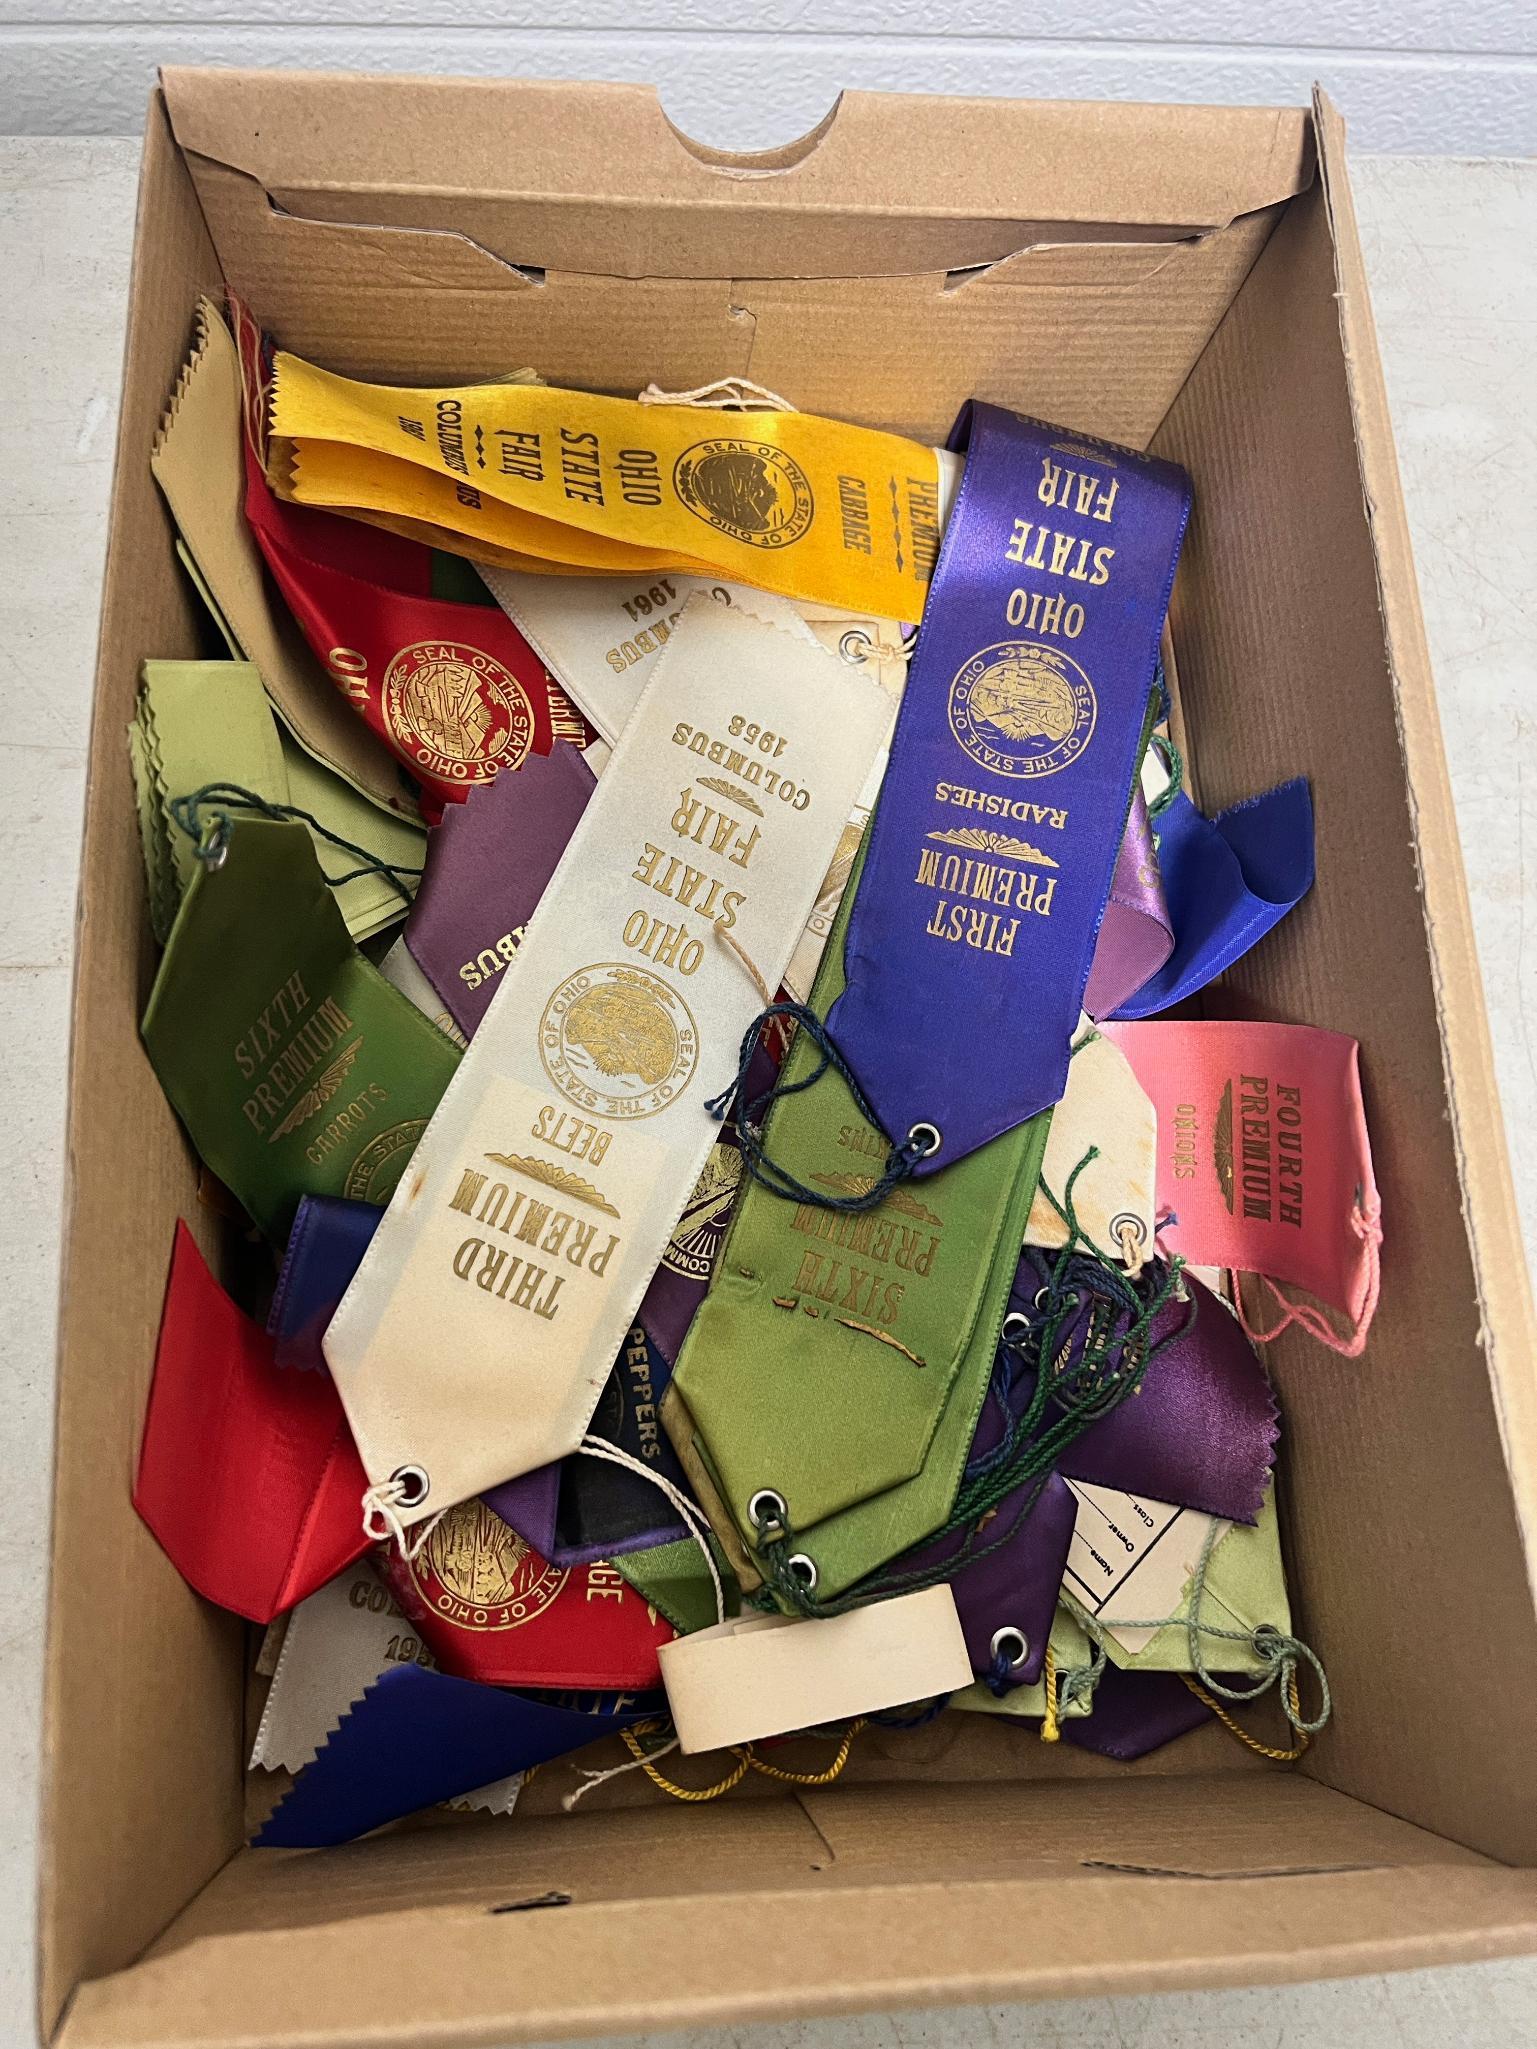 Vintage Ohio State Fait Ribbons from 1950's and 60's for Various vegetable entries